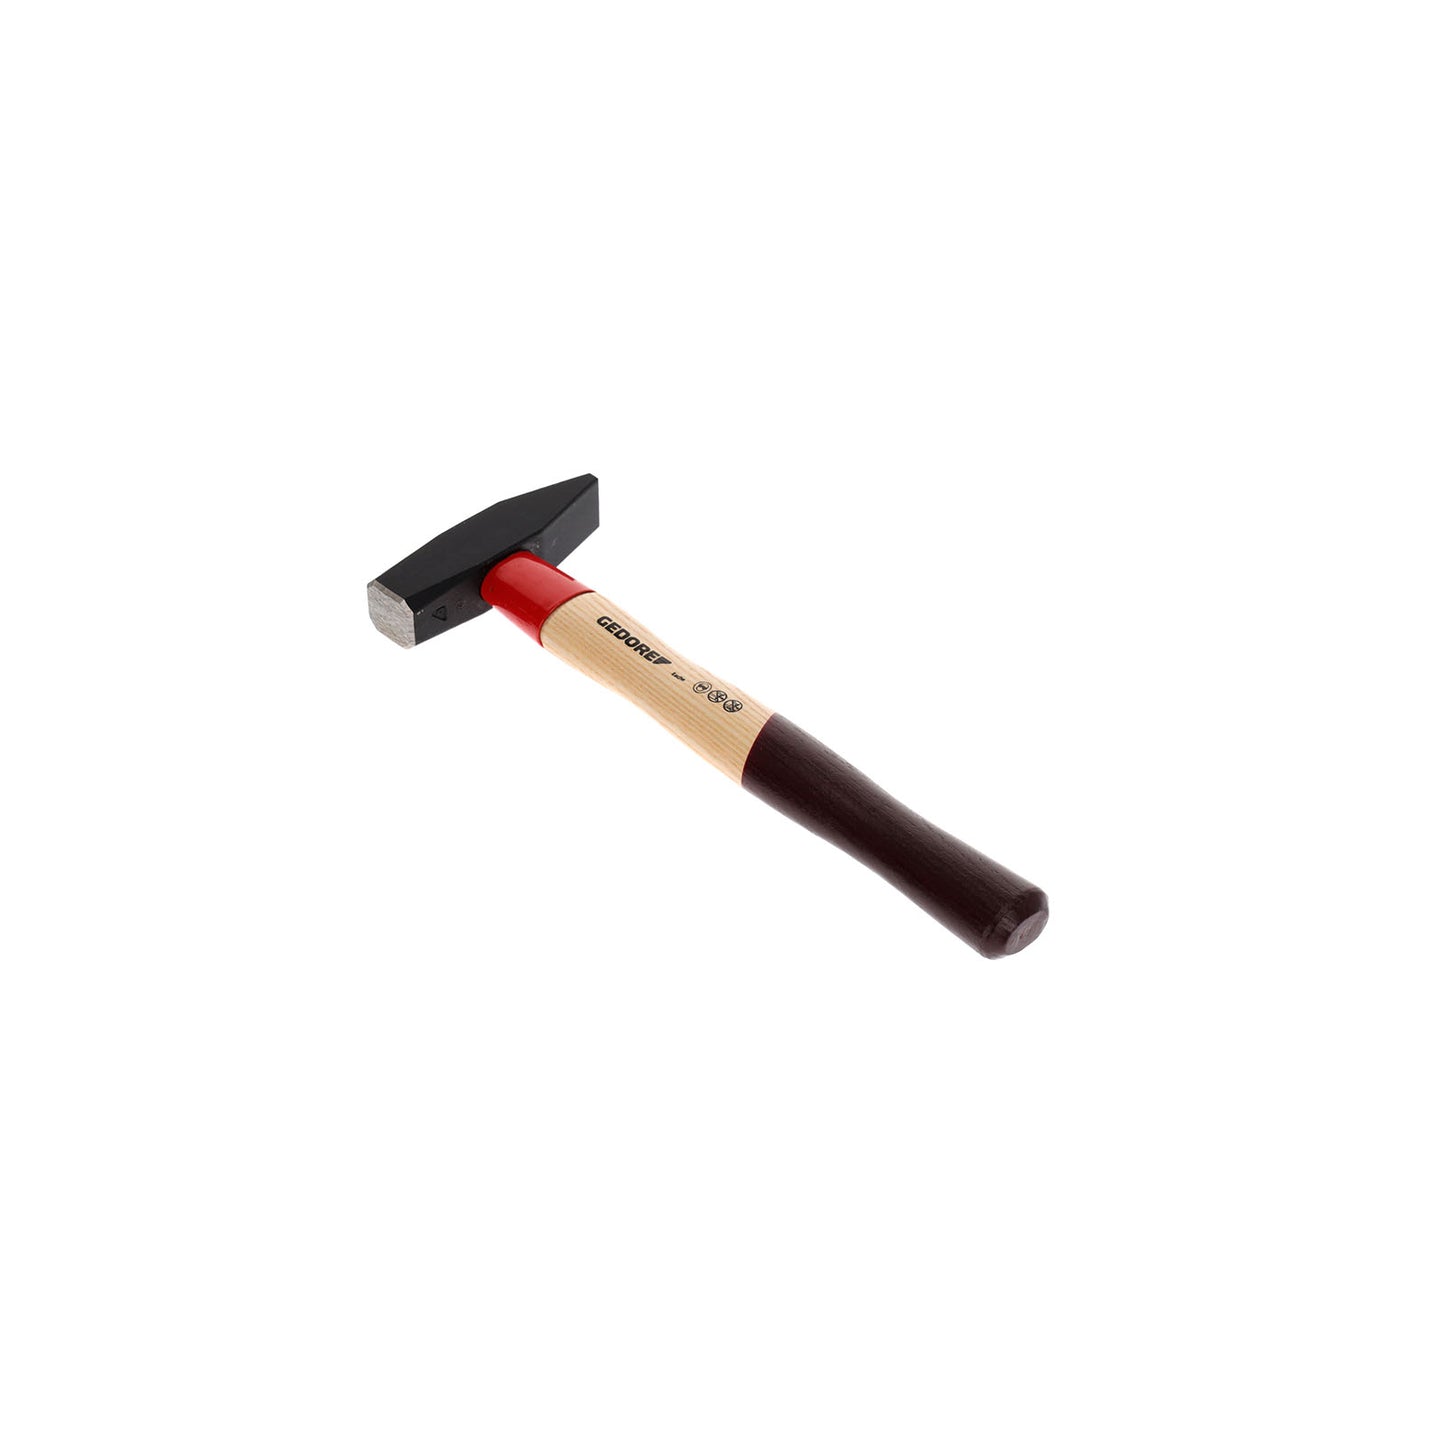 GEDORE 600 E-600 - ROTBAND assembly hammer 600g (8582340)